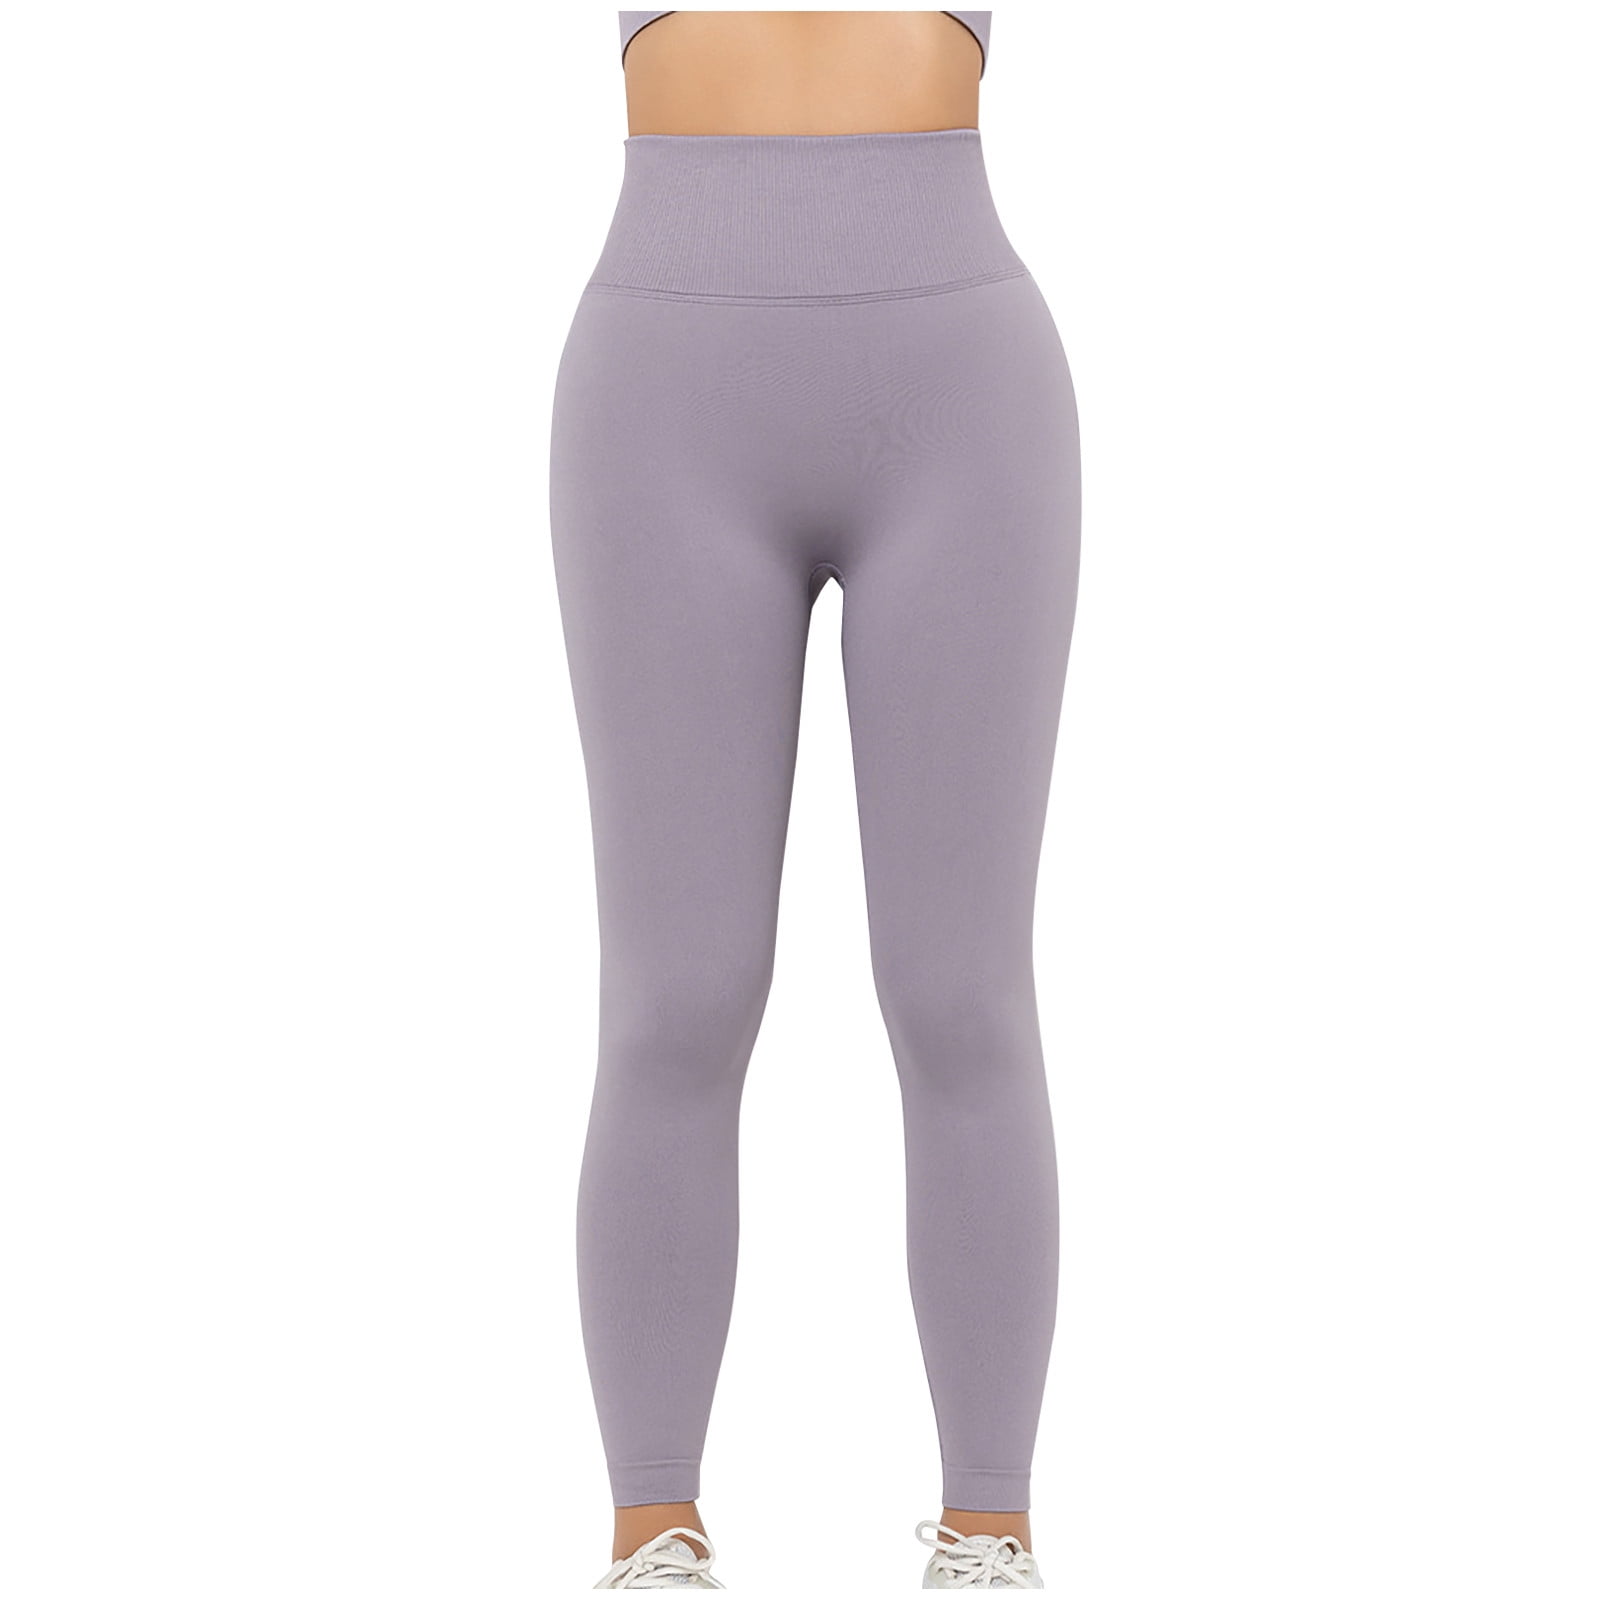 Women's Buttery Soft High Waisted Yoga Pants Tummy Control Workout Running  Yoga Leggings No See-Through Stretch Tights 